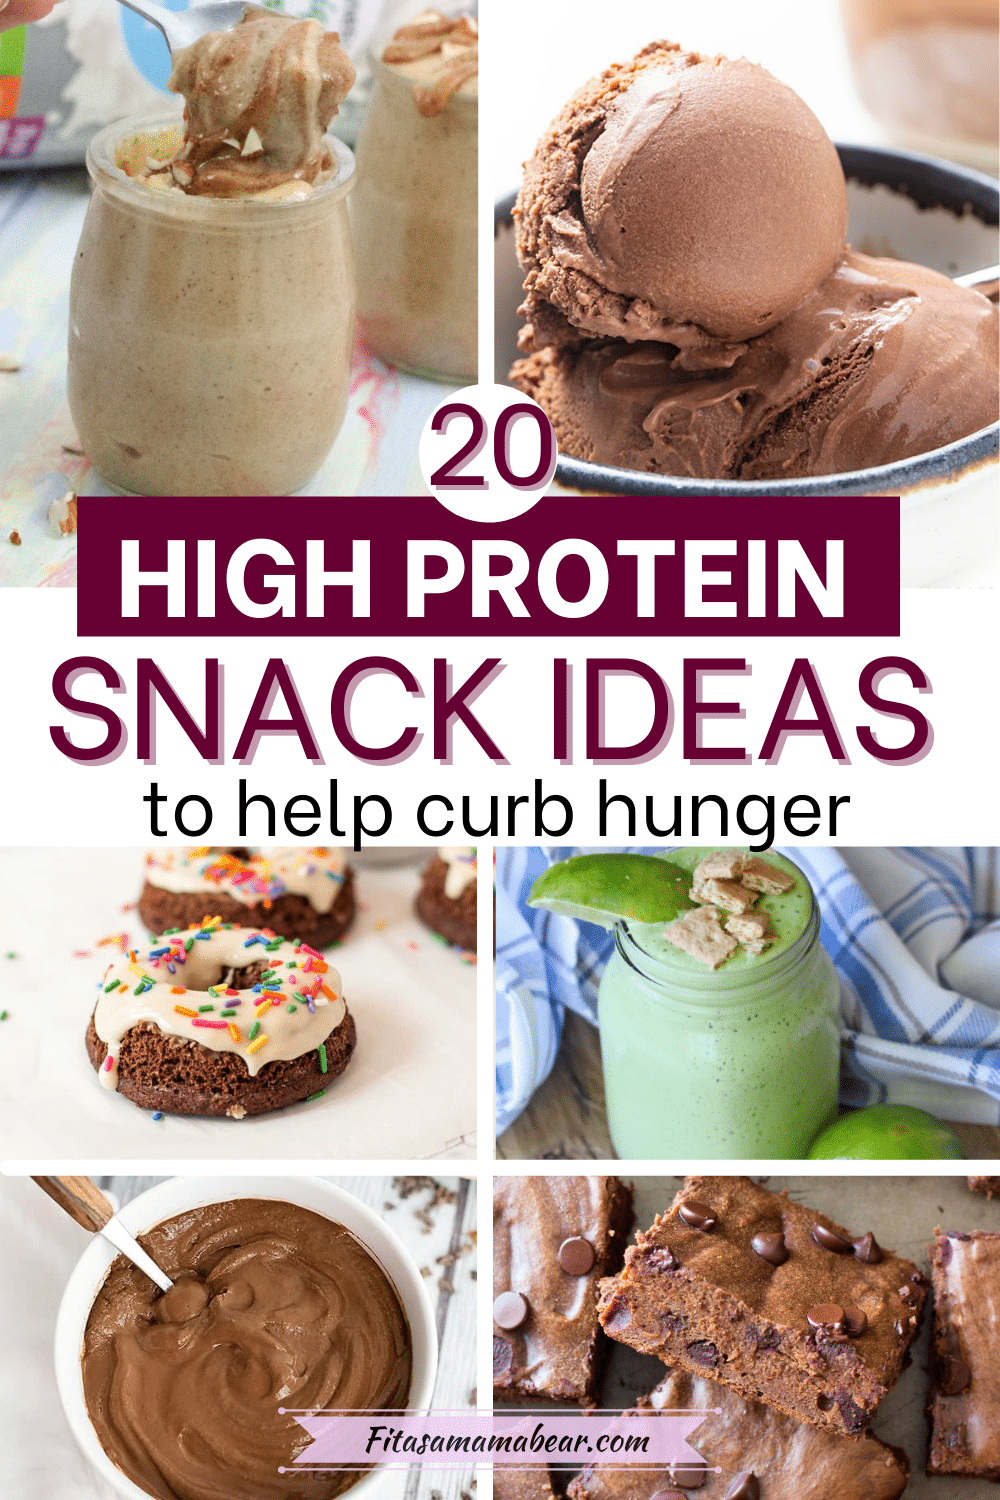 Pin image with text: multiple images of high protein snacks like protein smoothies, donuts, protein fluff and ice cream with text about high protein snacks